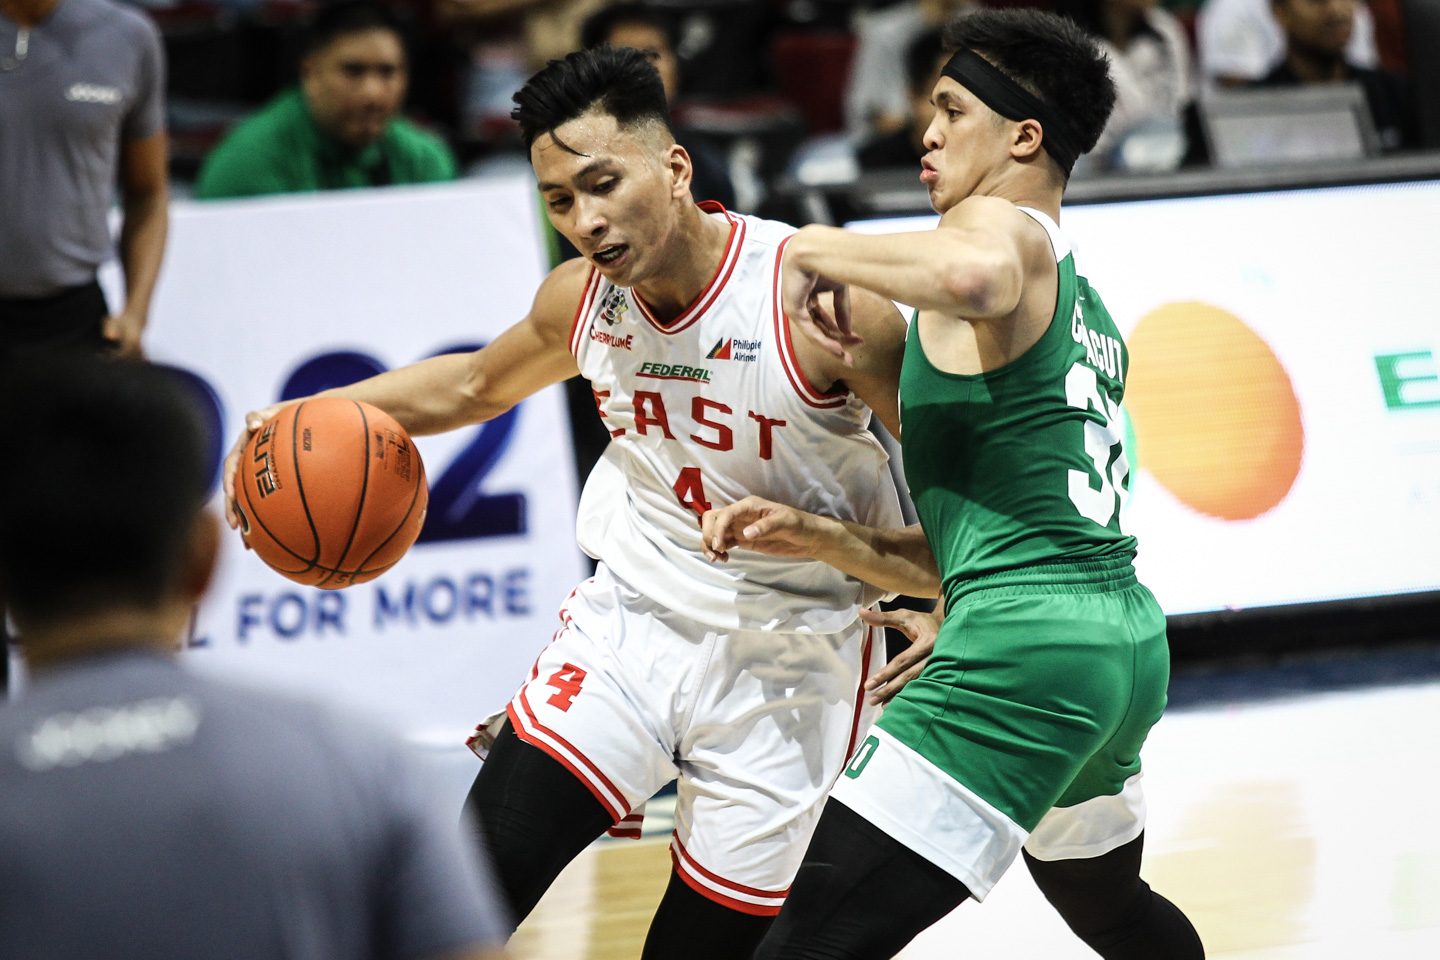 IN NUMBERS: Suerte leads Season 82’s single-game points record